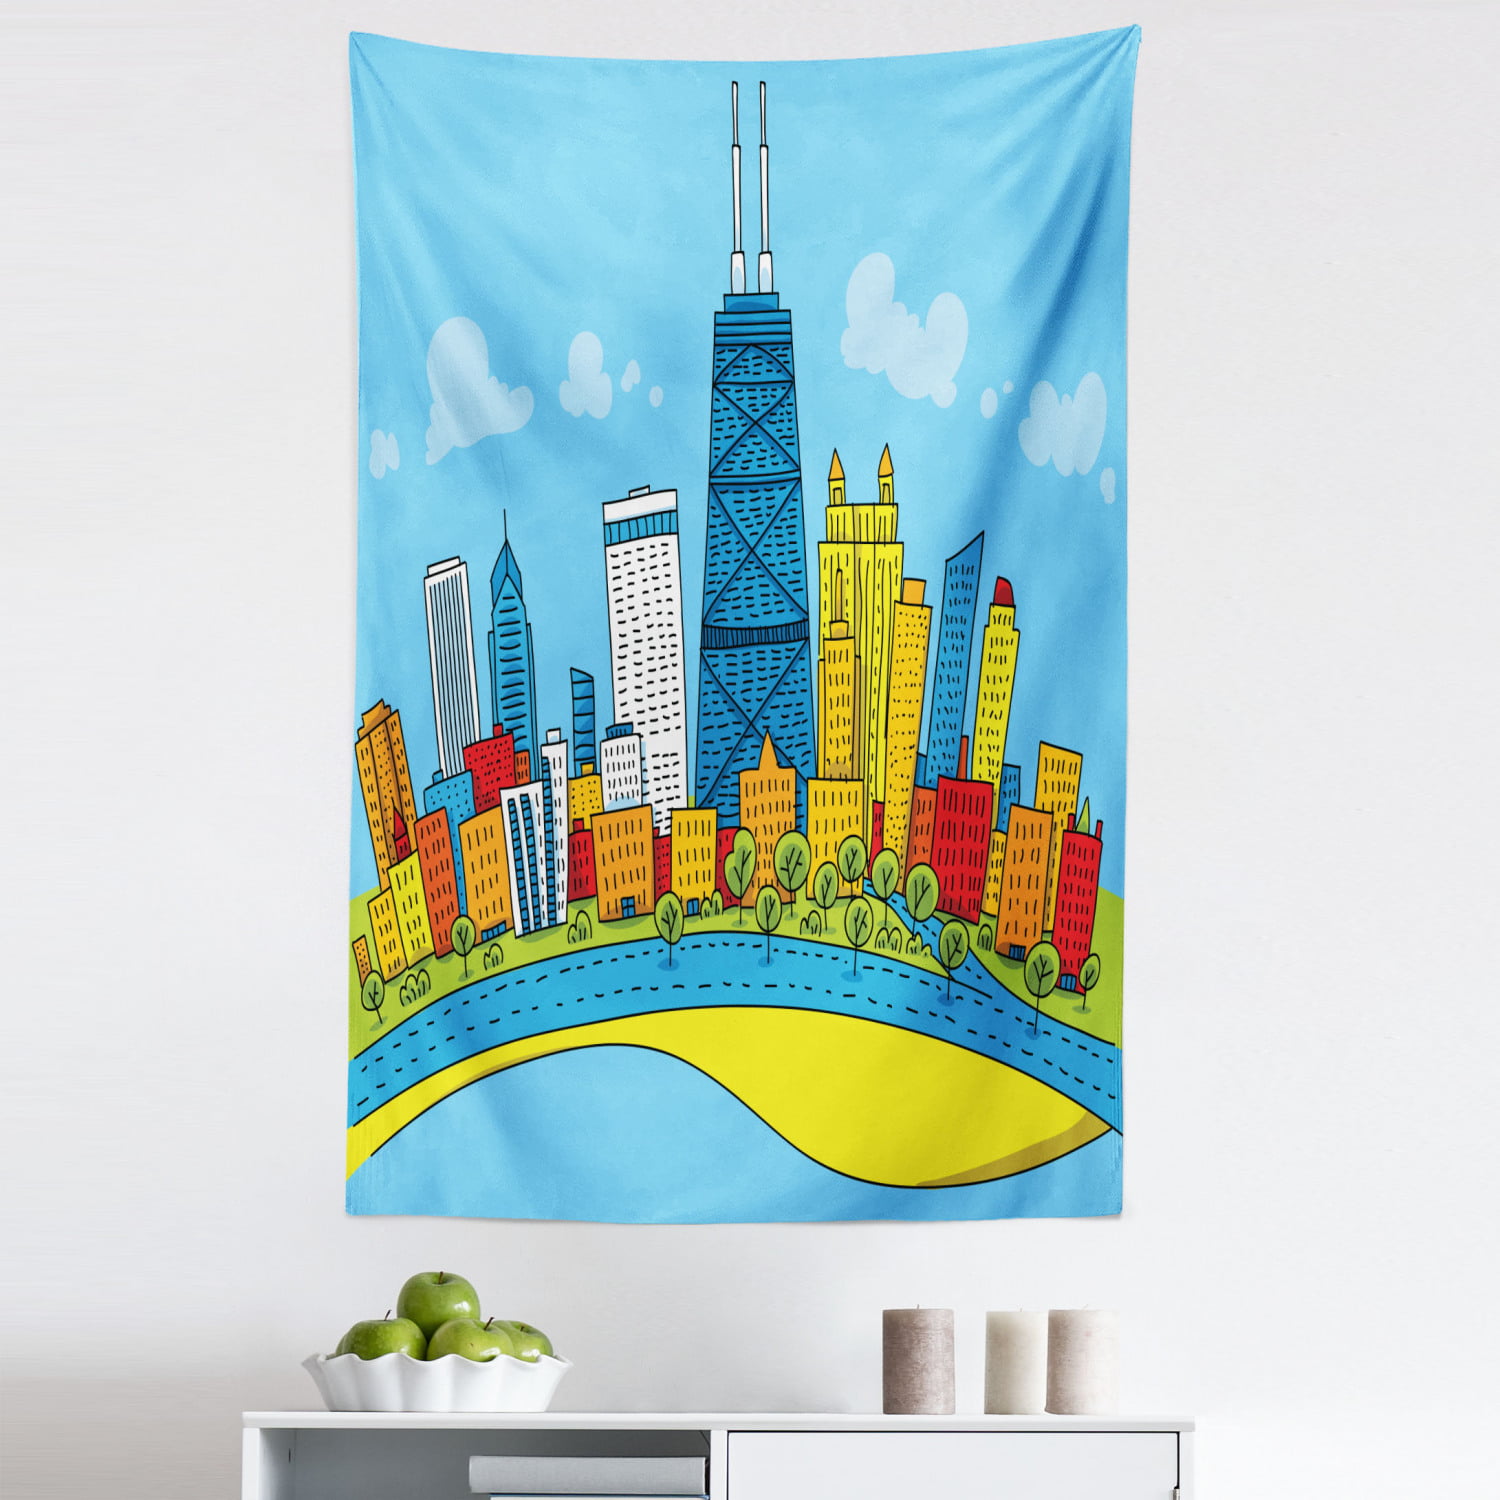 Chicago Skyline Tapestry, Cartoon Style City View with Colorful Buildings  Caricature, Fabric Wall Hanging Decor for Bedroom Living Room Dorm, 5  Sizes, Multicolor, by Ambesonne 